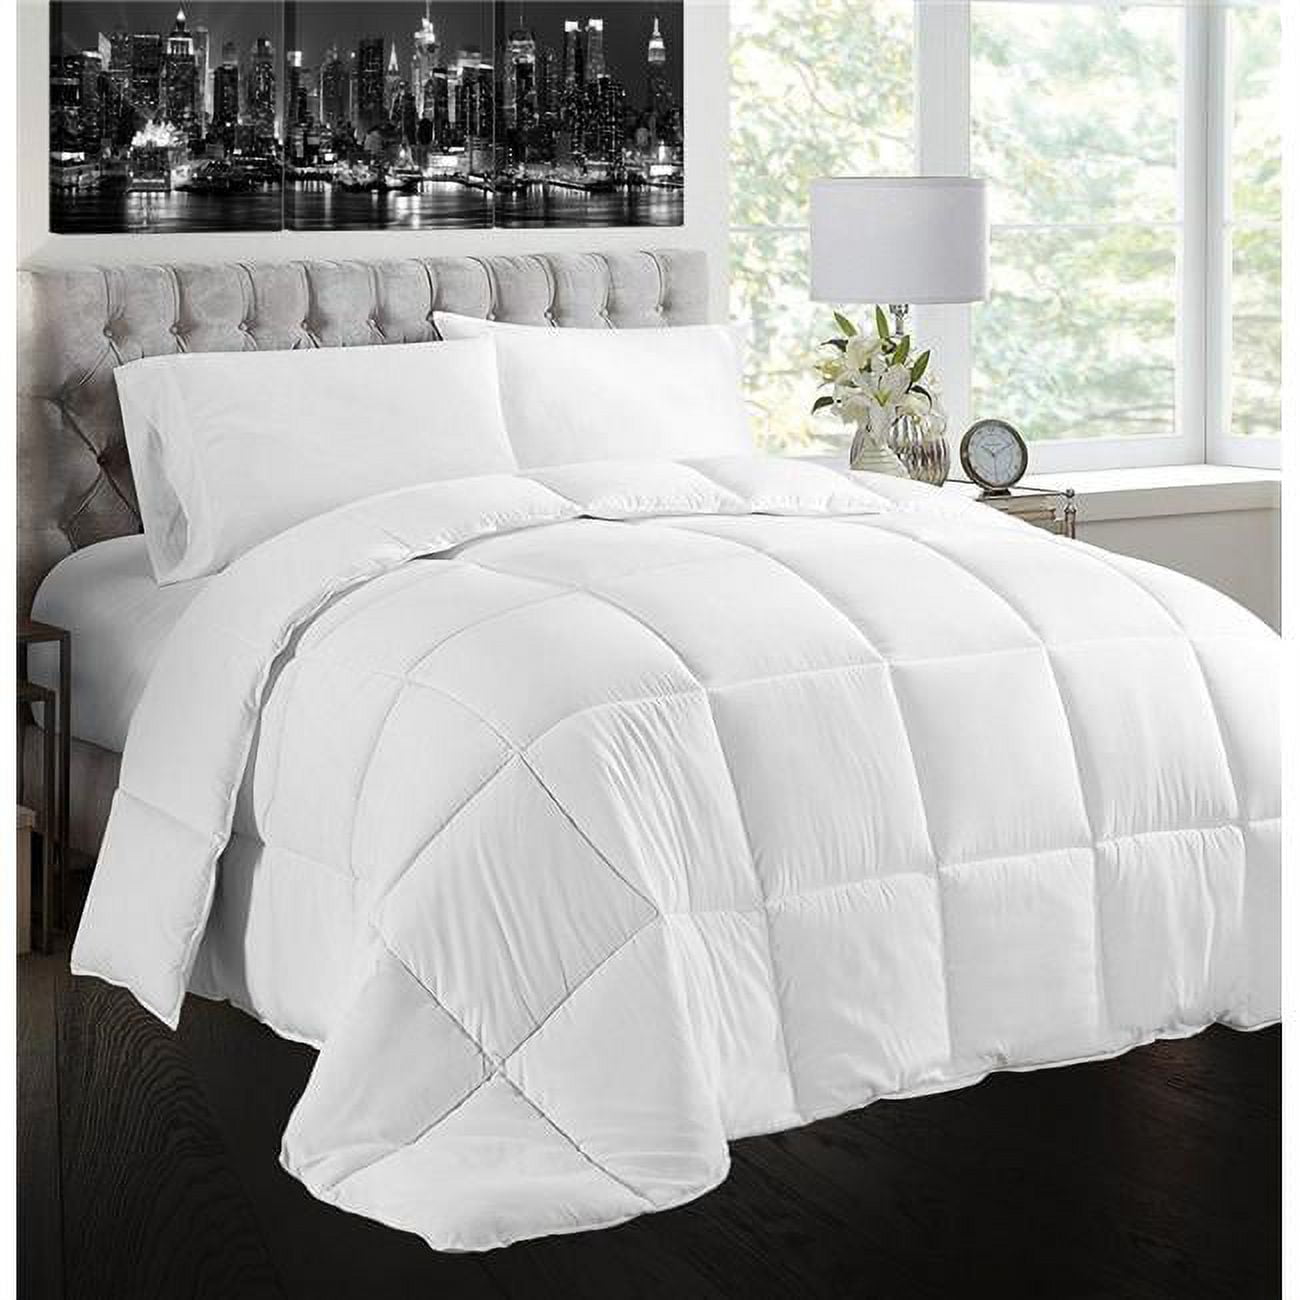 Cls-fc-king-102 102 X 86 In. White Goose Feather & Down 100 Percent Cotton Case King Size Comforter Set